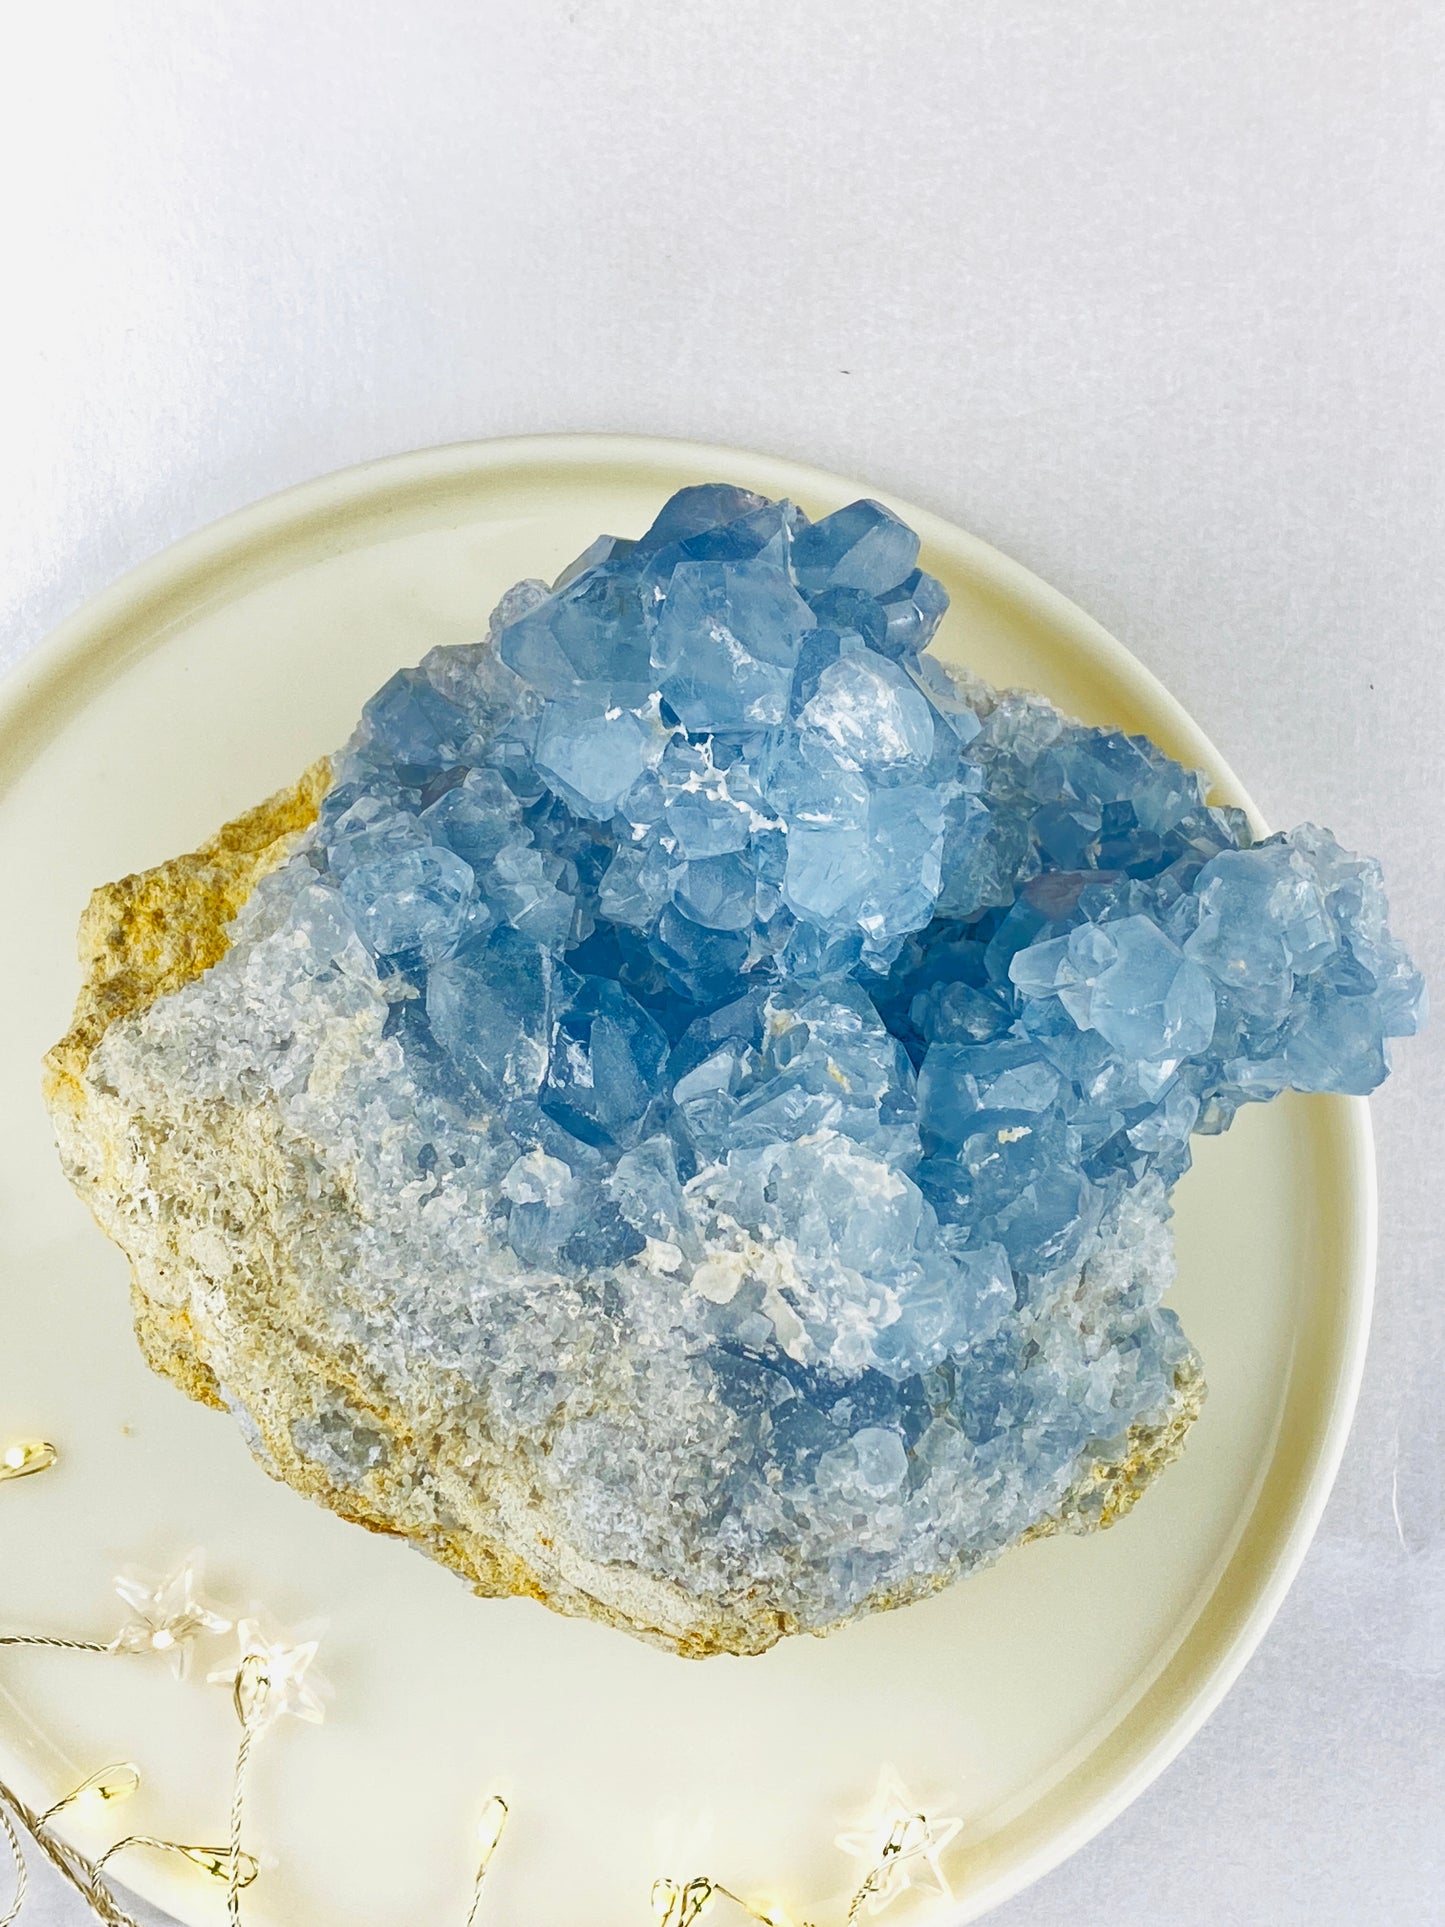 Celestite crystal, large cluster, A grade, Crystal to enhance intuition, promote calm and peace, connect to guides, Release negativity.